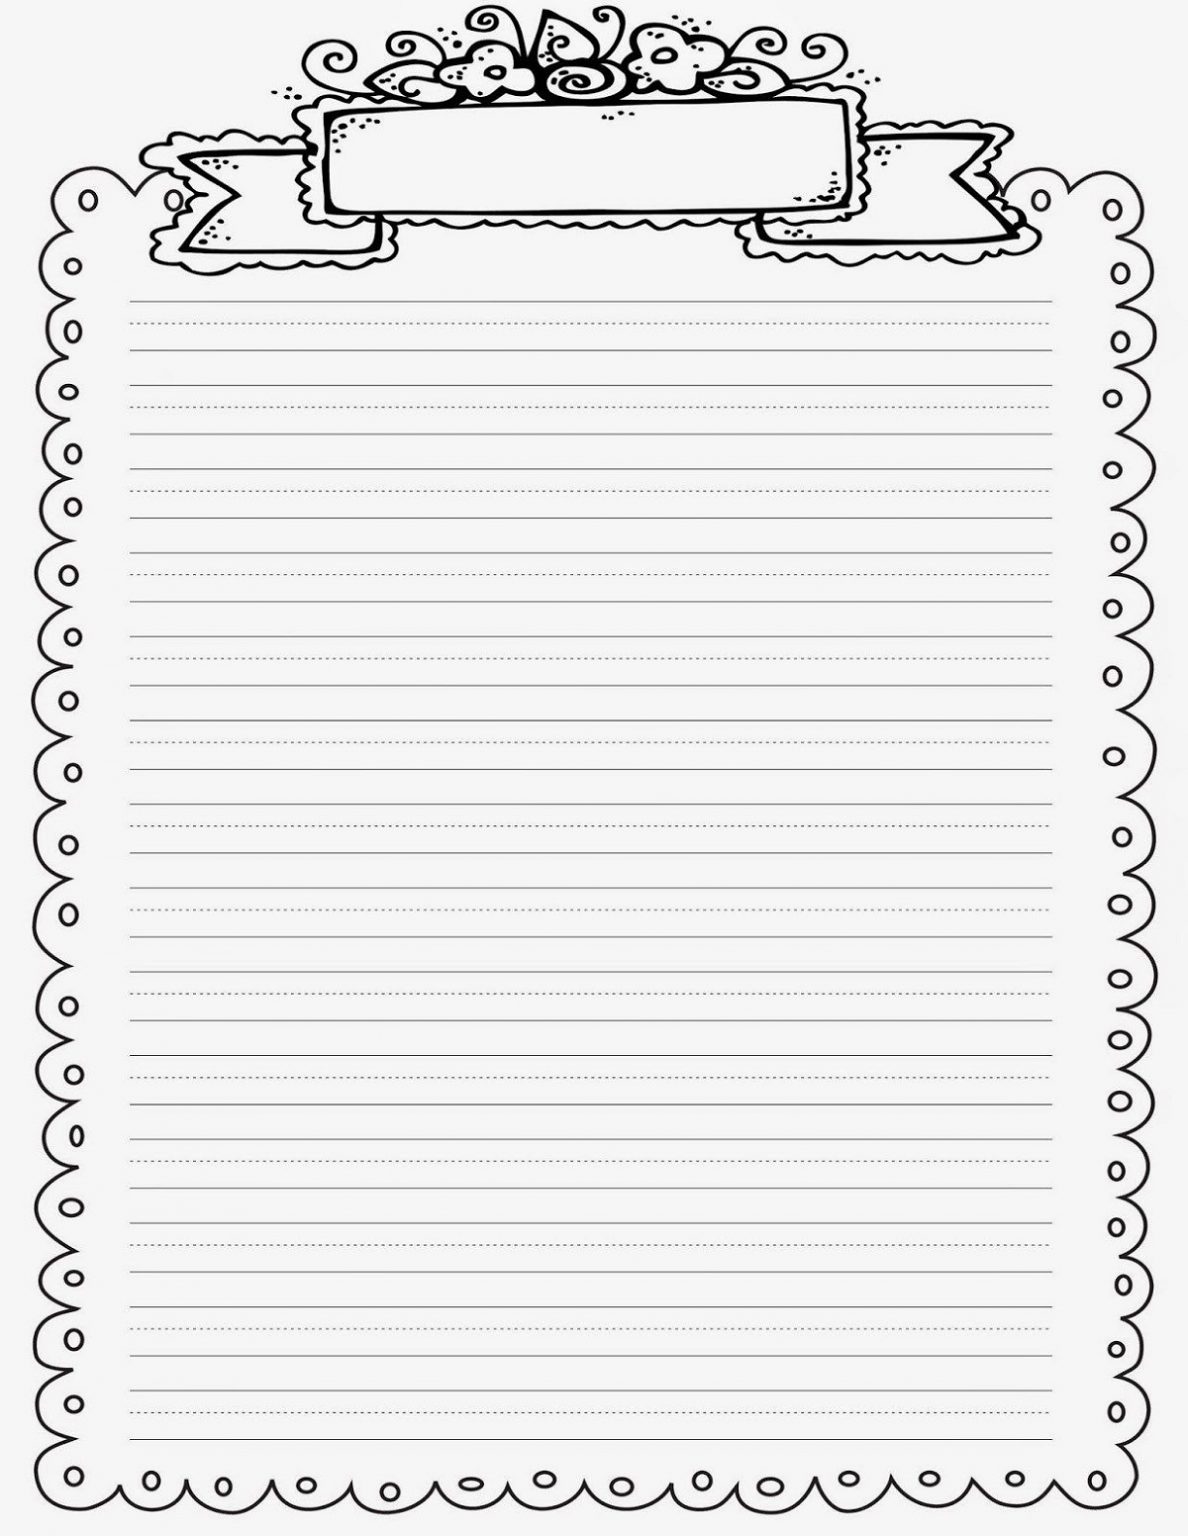 printable-notebook-paper-interesting-activity-shelter-printable-writing-paper-by-aimee